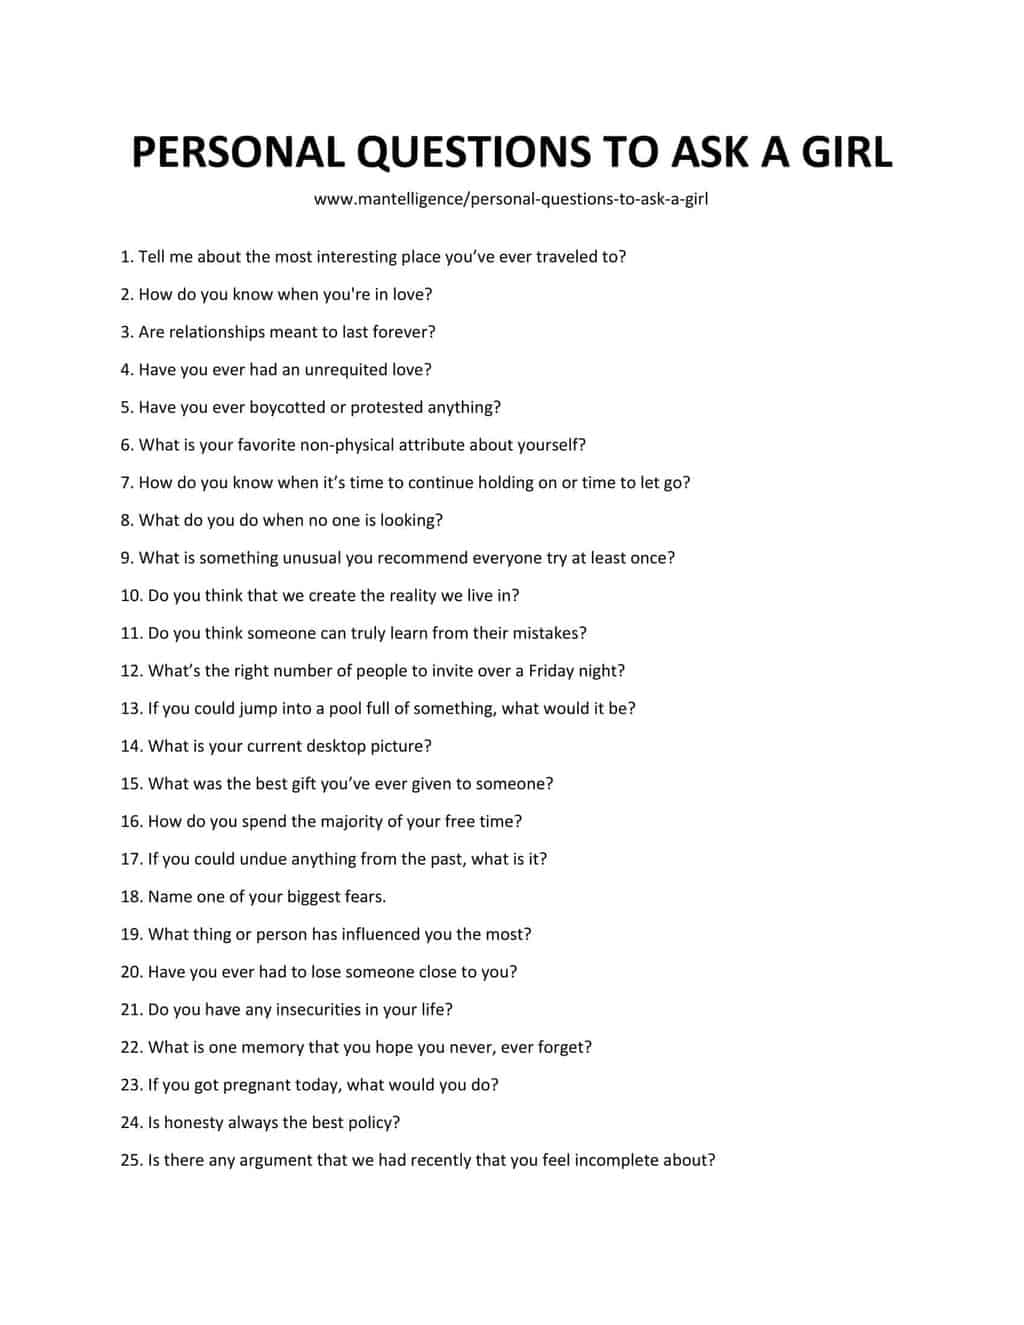 Thought provoking questions to ask a girl